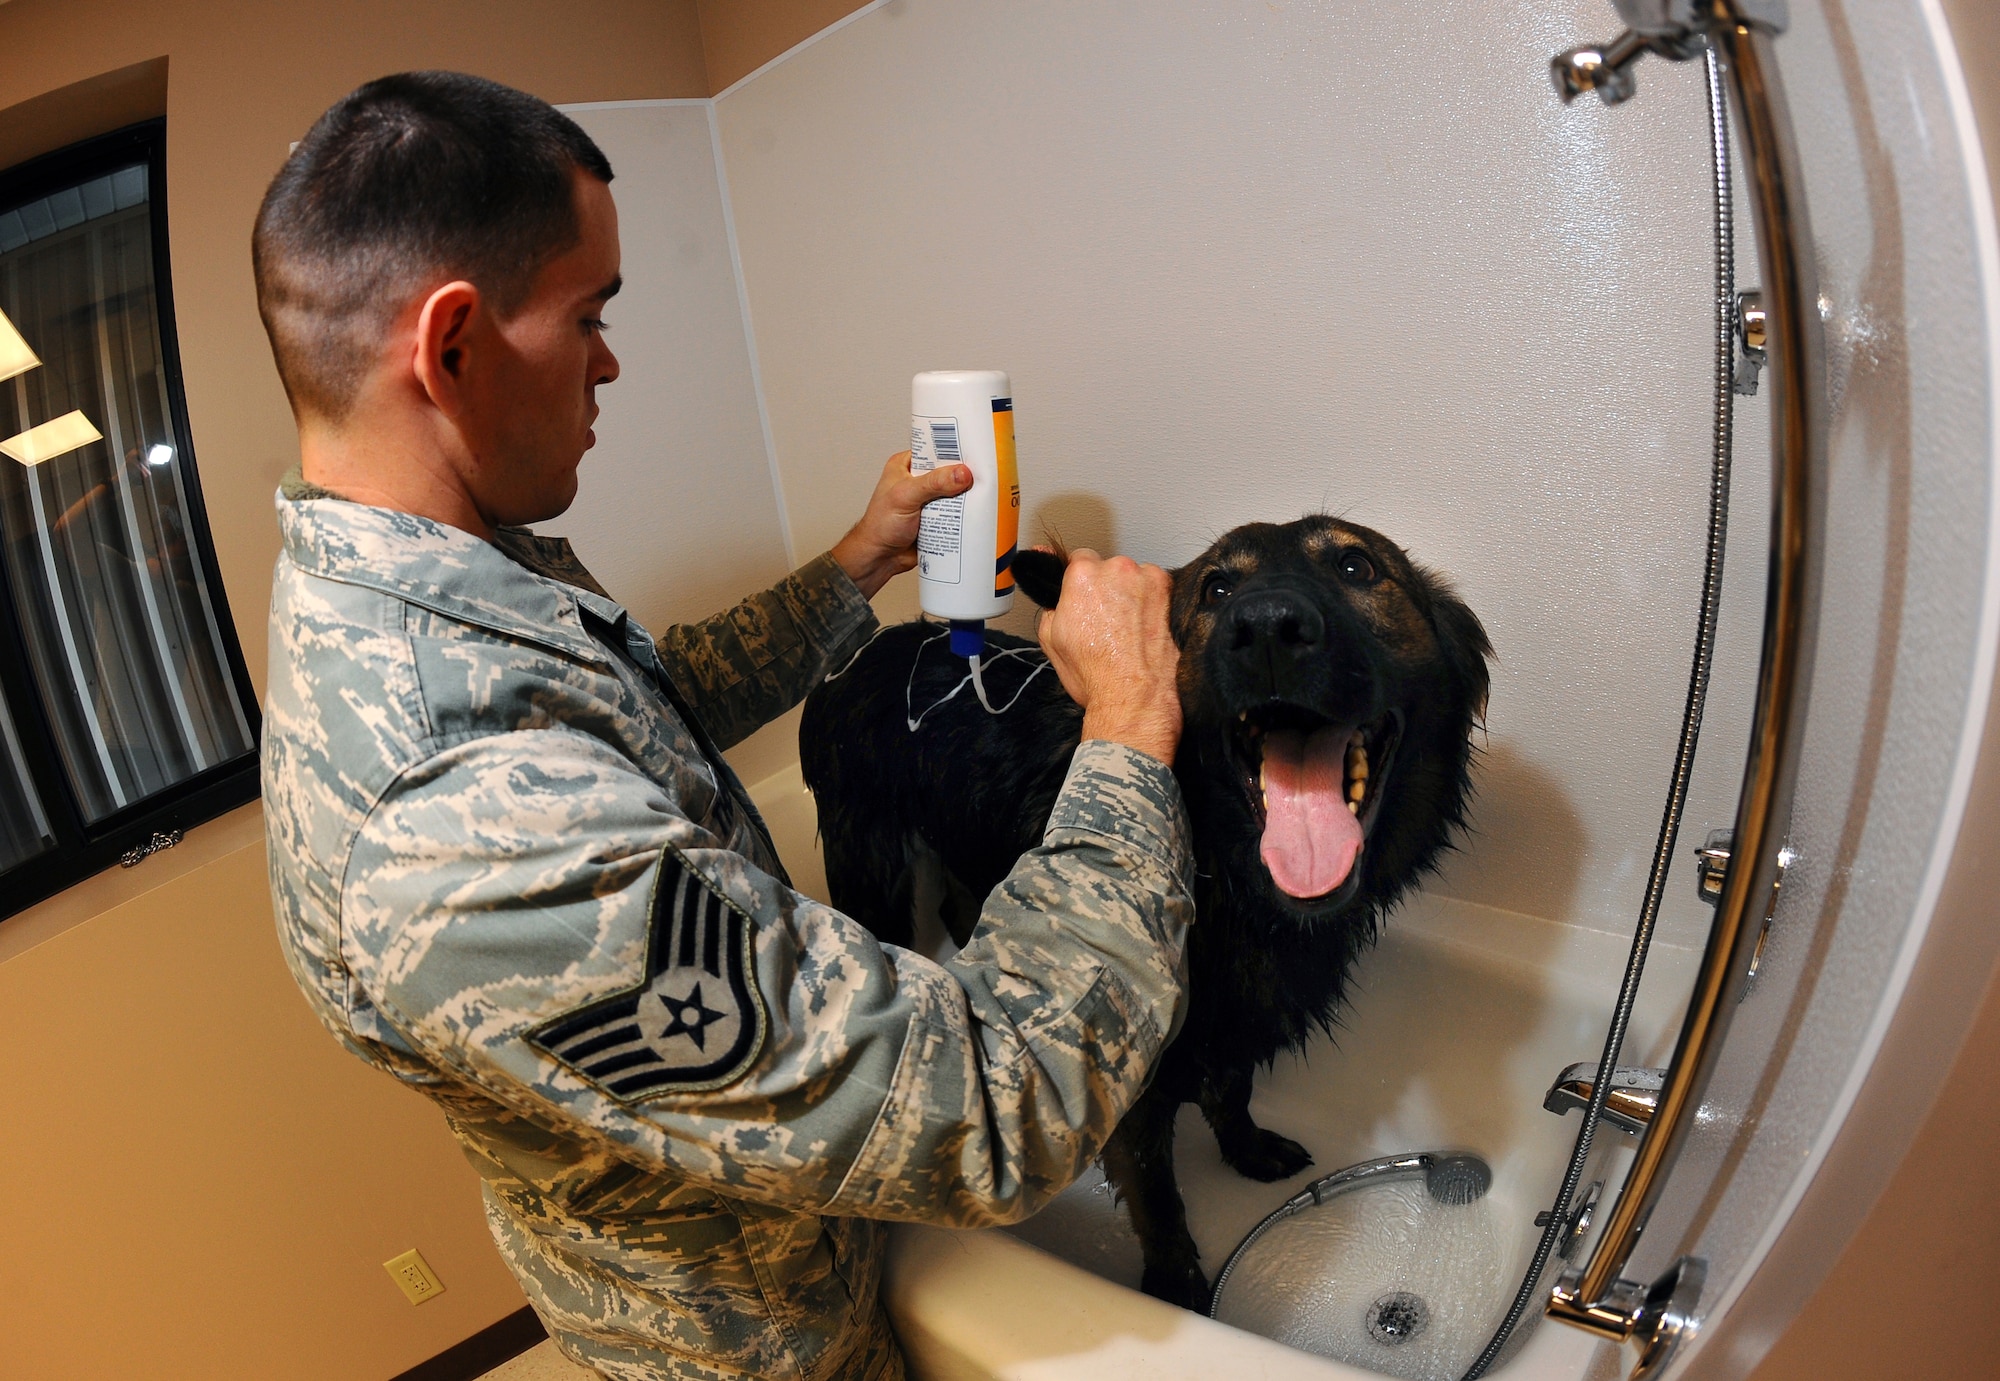 OFFUTT AIR FORCE BASE, Neb. - Dasty, a three-year-old male Belgian Tervuren, gets his monthly bath by his partner Staff Sgt. Joel Therrien, a military working dog handler with the 55th Security Forces Squadron, Dec. 1.  Cleanliness is essential to keeping the dogs healthy and mission ready.  U.S. Air Force Photo by Josh Plueger (Released)